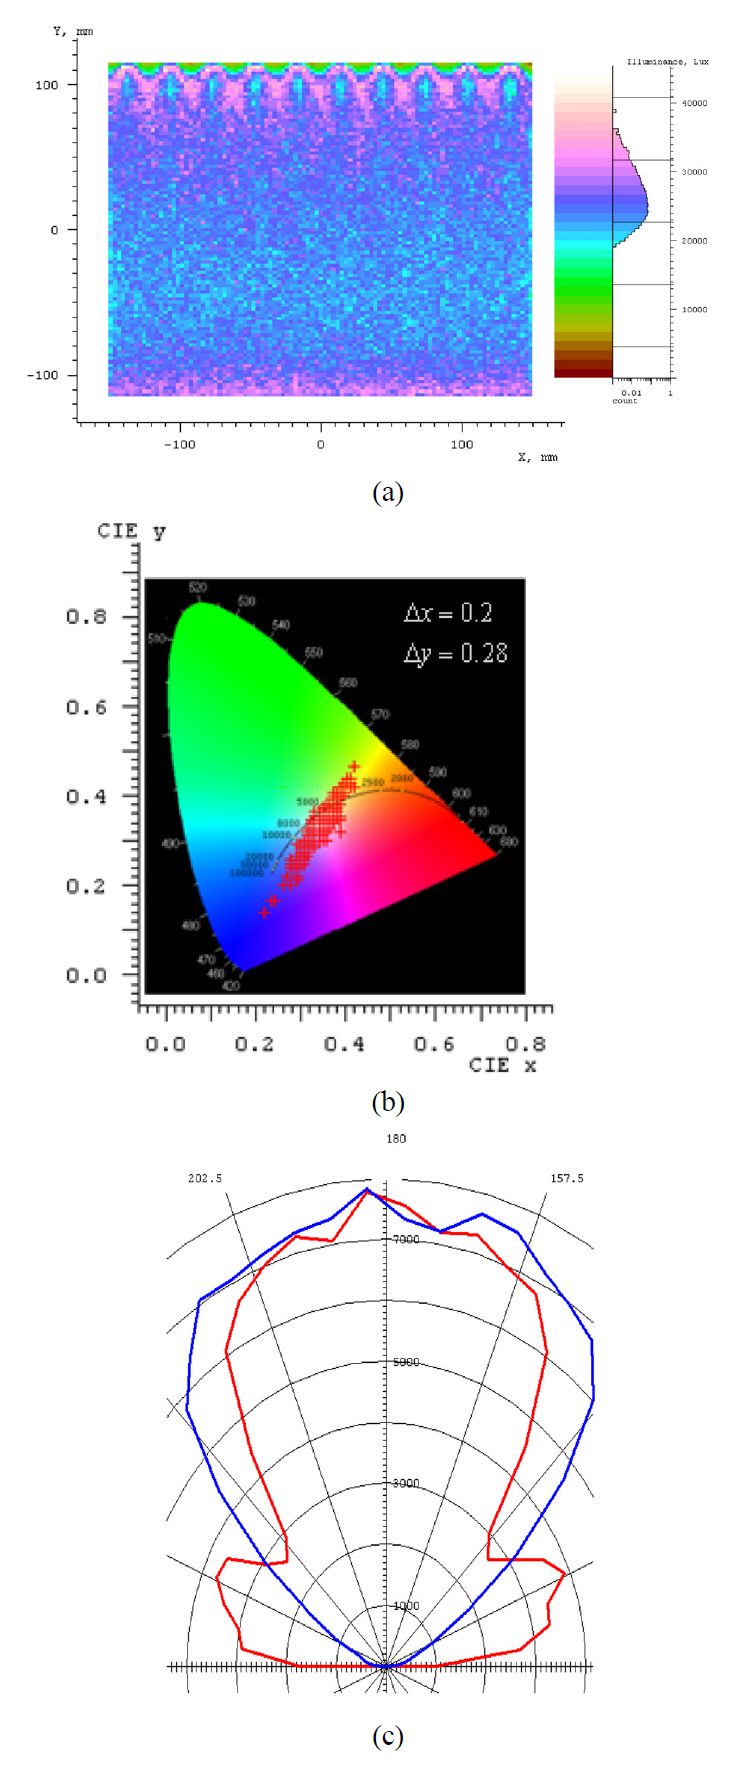 Simulation results of RGB LED BLU without colormixing bar. (a) Hot spots appear at the right edge of thelightguide panel of the conventional edge-lit BLU using RGBLEDs (b) the color distribution in the CIE chromaticitydiagram showing color spread ？x=0.2 ？y=0.28.